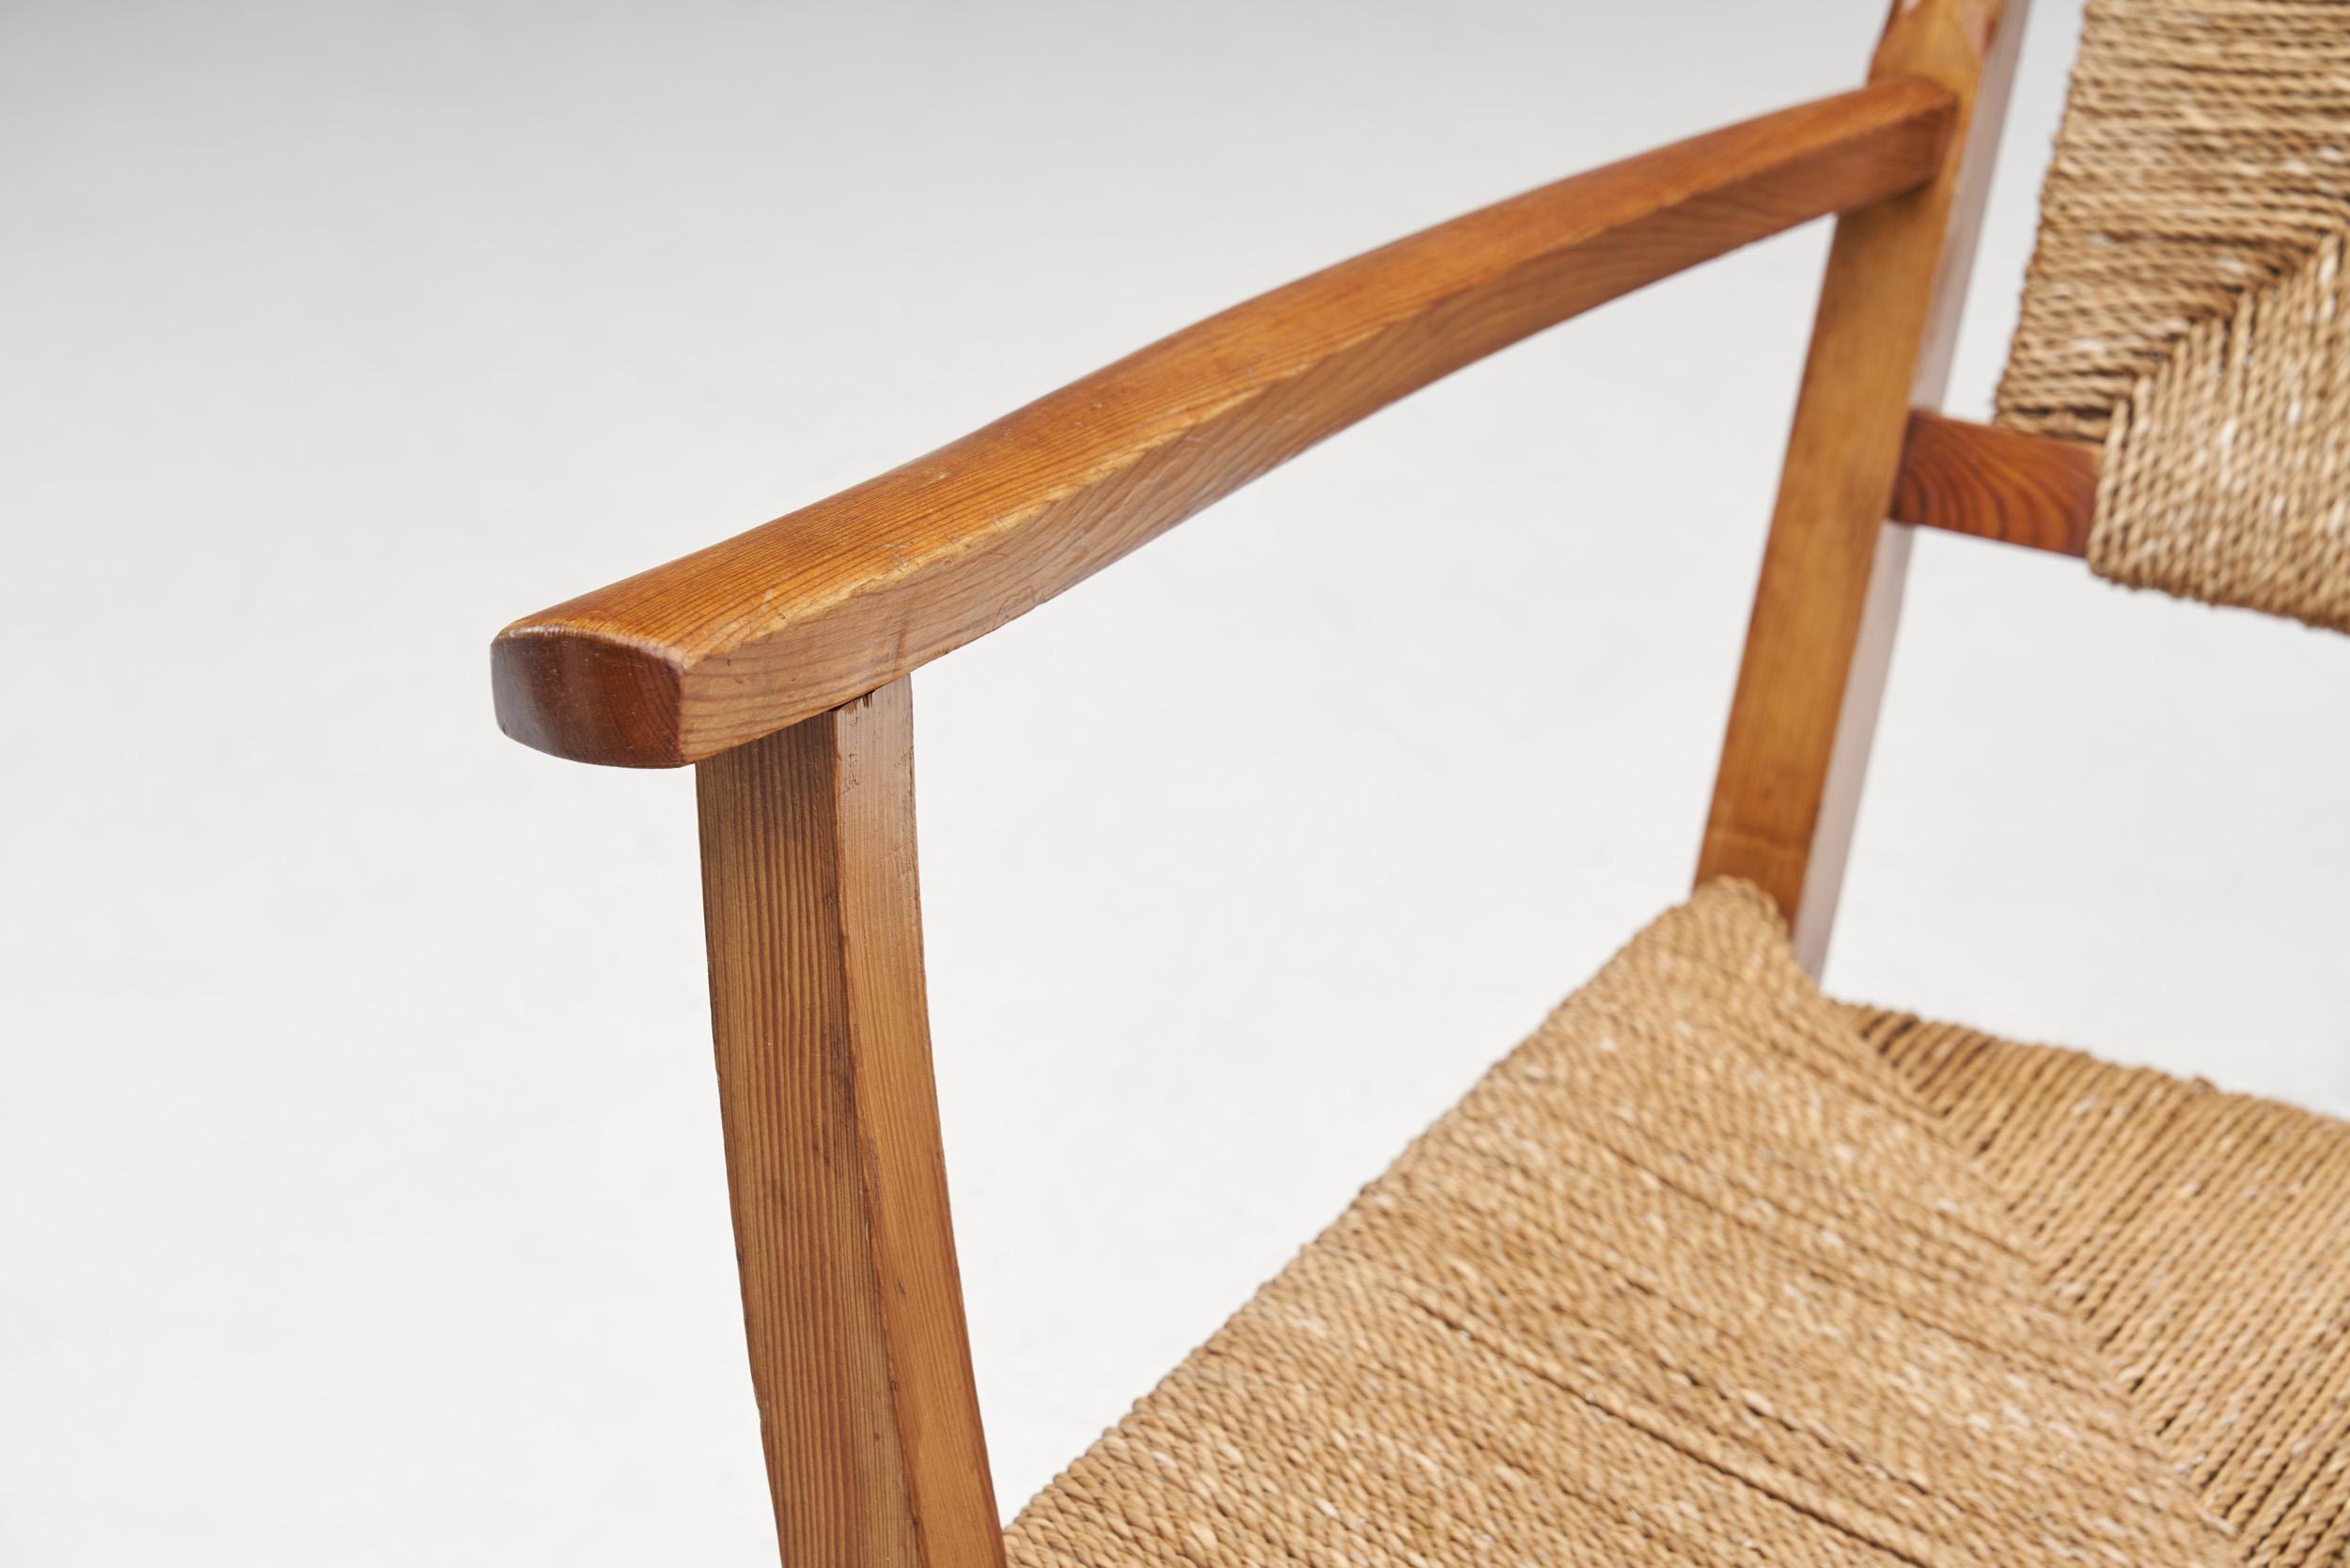 Norwegian Wood and Papercord Rocking Chairs by Slåke Møbelfabrikk, Norway 1940s For Sale 4